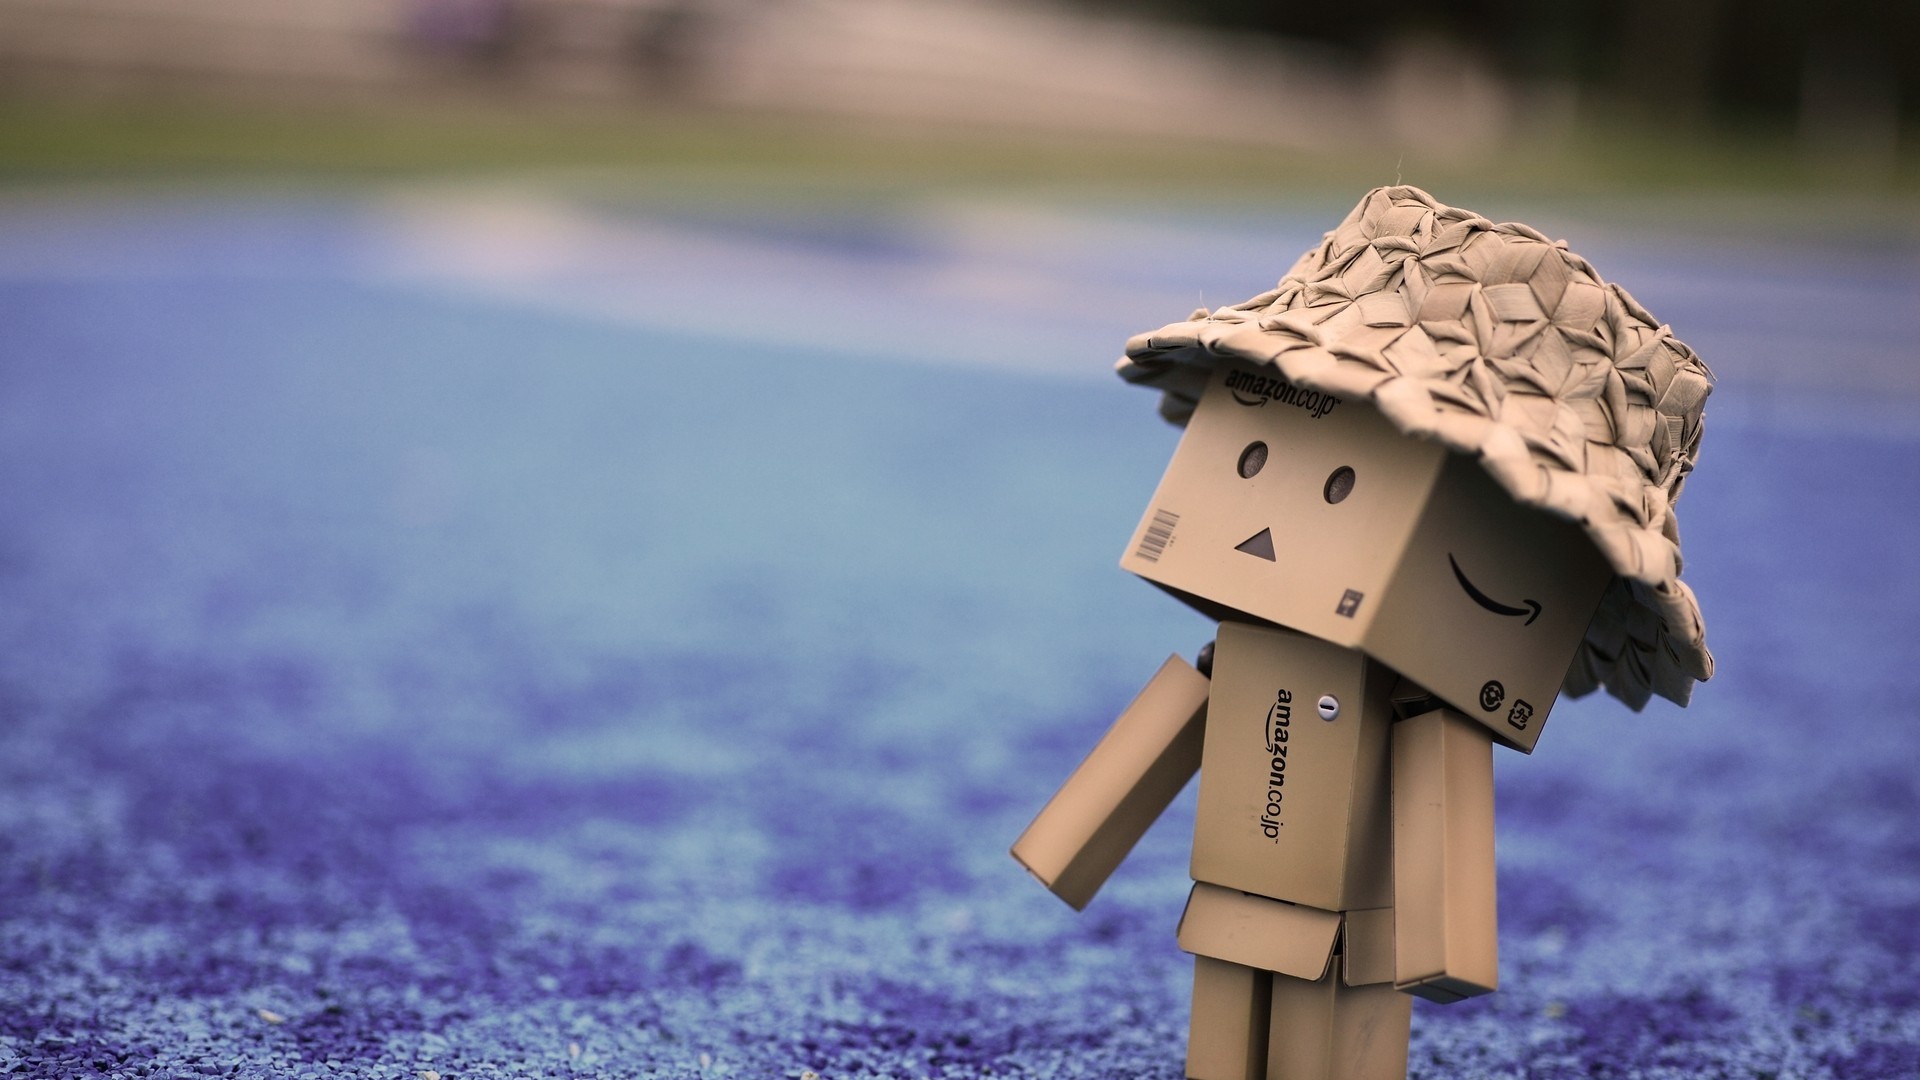 Wallpaper S Collection Danbo